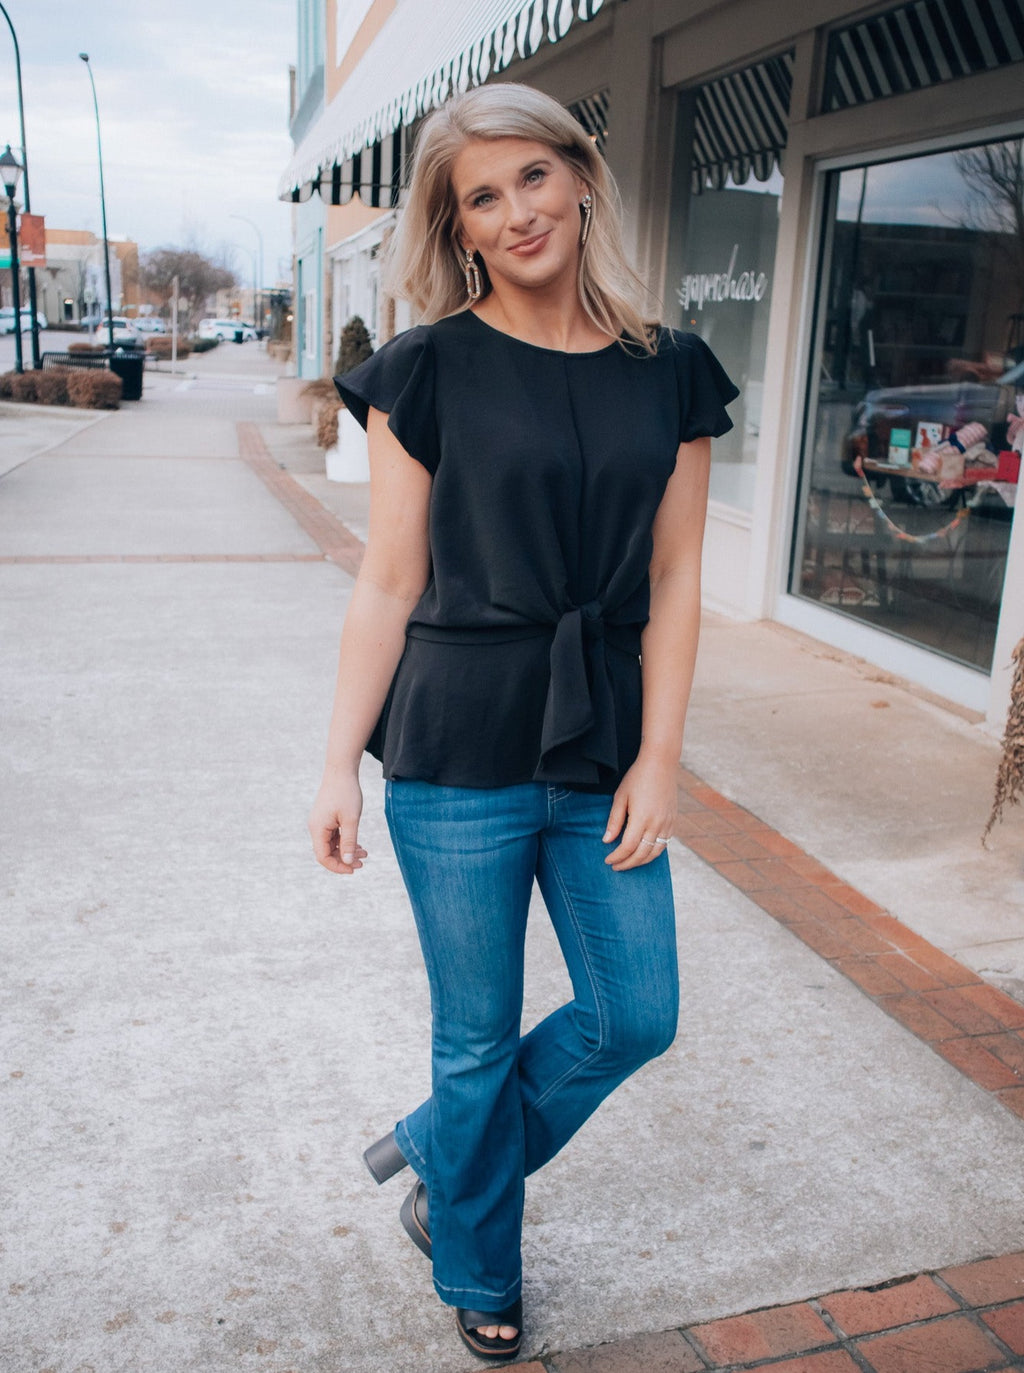 Top features a solid base color, front tie detail, short flutter sleeves, round neck line, elastic waist, and runs true to size! -black